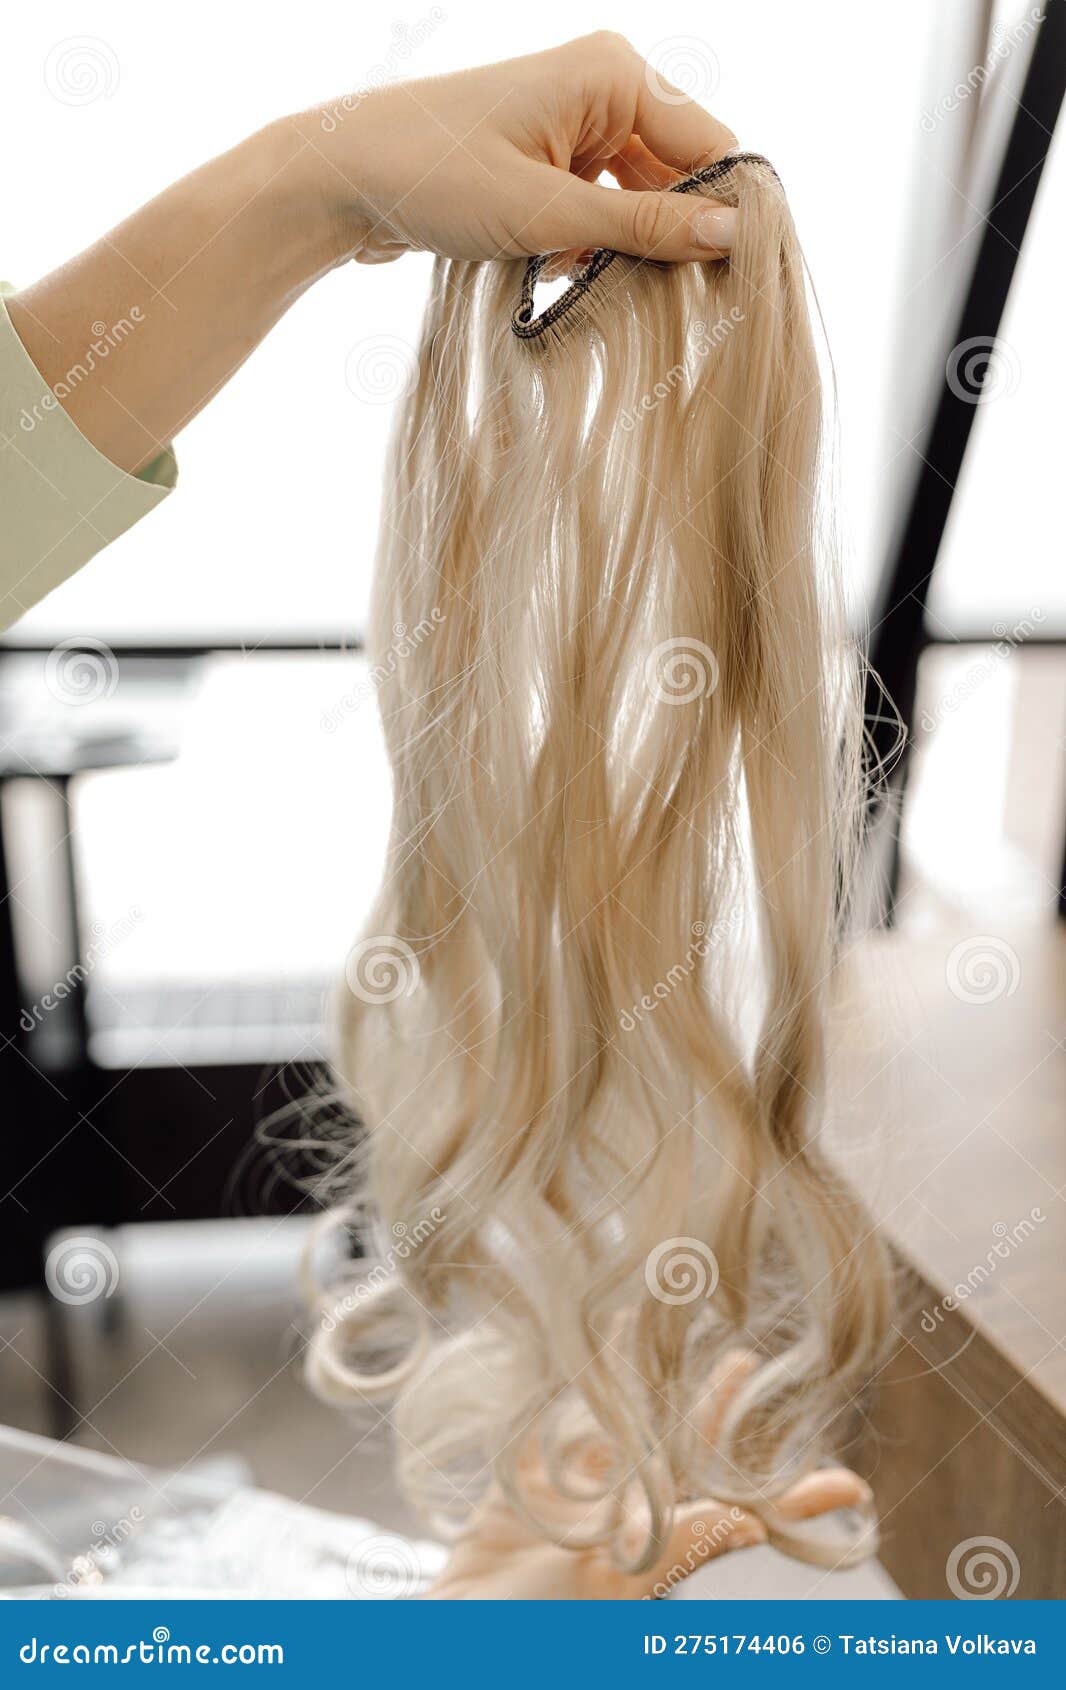 cropped photo of woman hairdresser holding long fair blond hairpiece chignon weave bundle for extension in beauty salon.